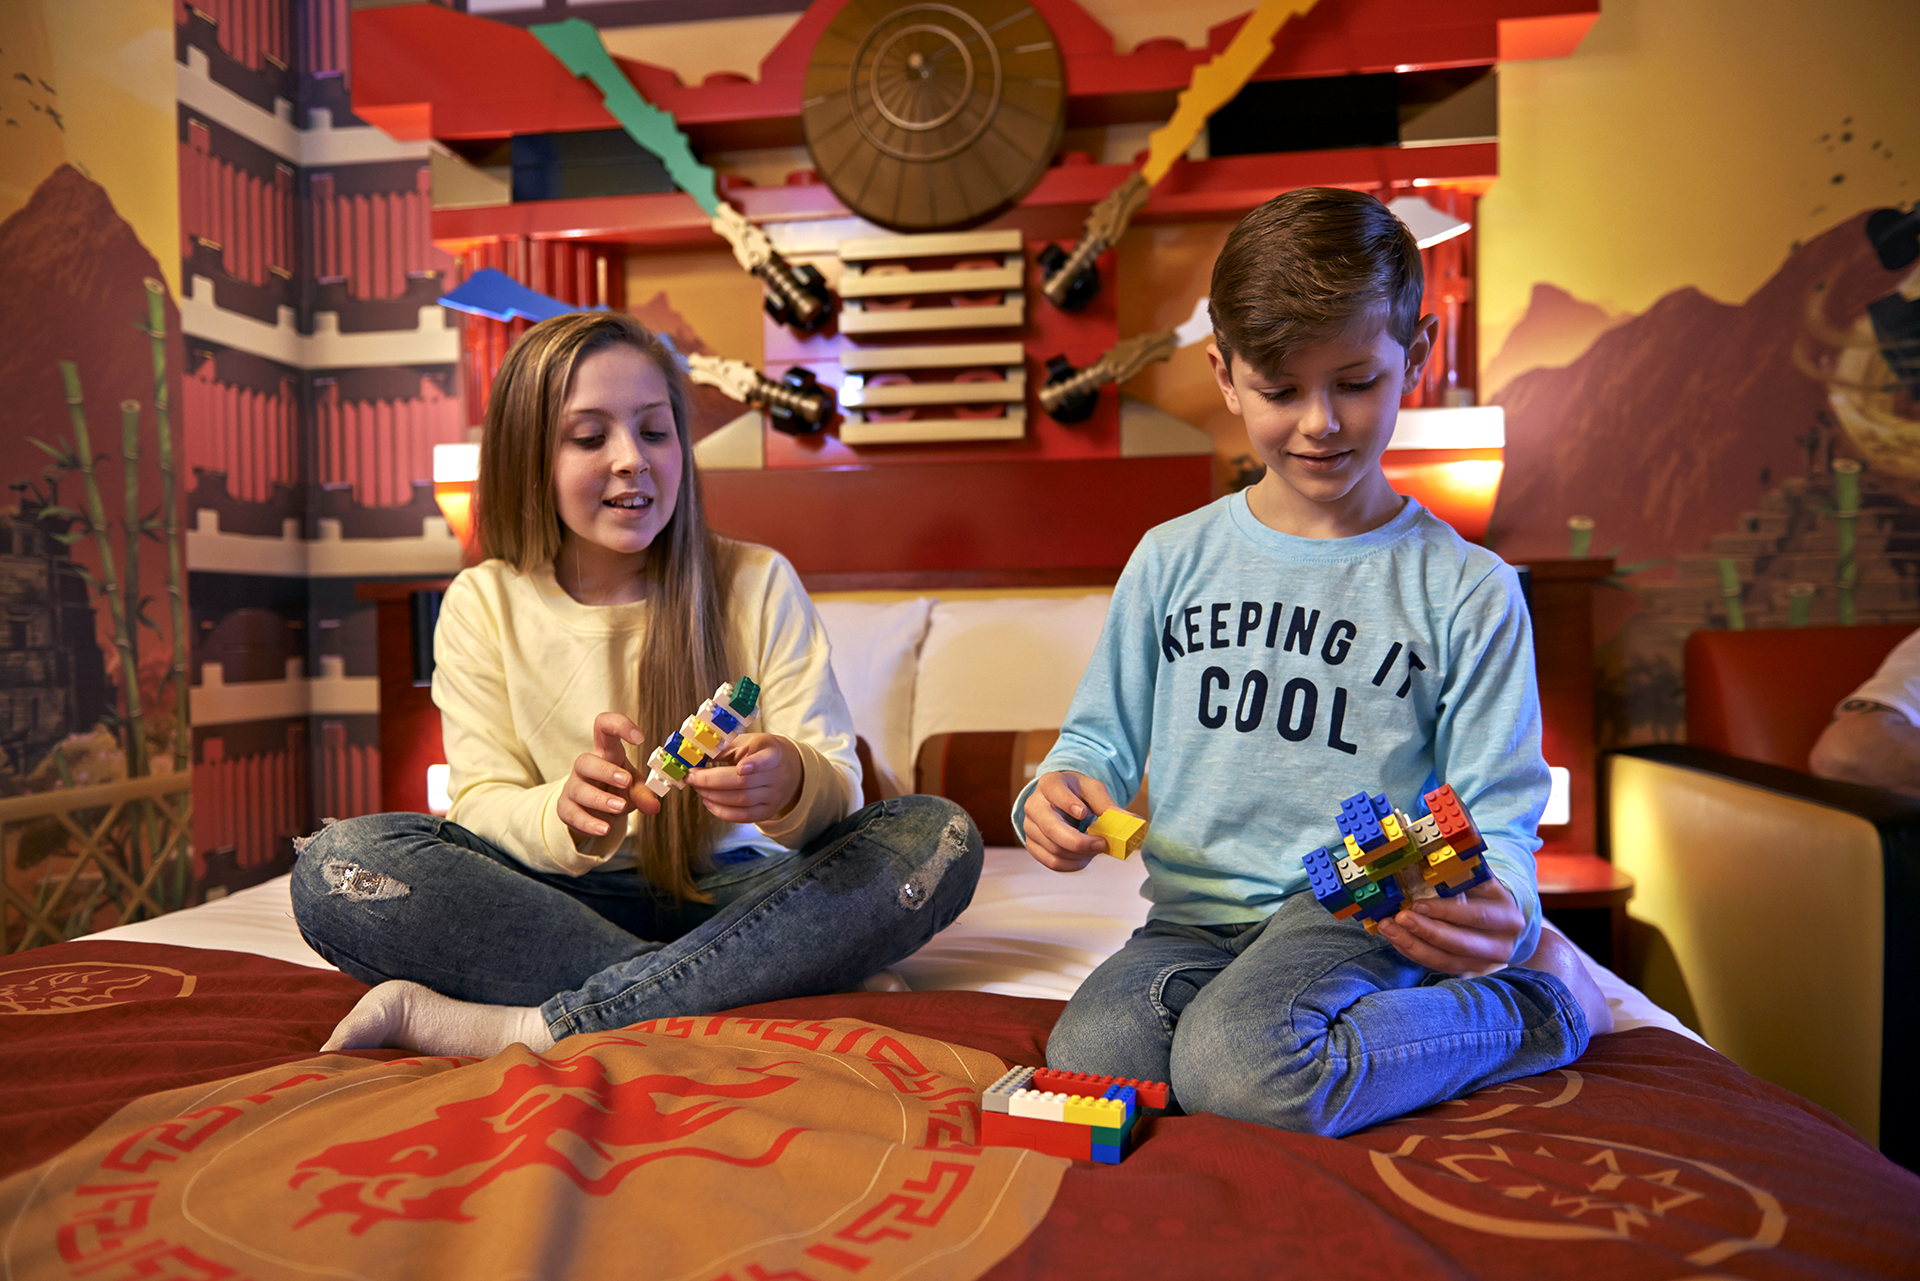 Children playing withe LEGO in the NINJAGO Themed Room at the LEGOLAND Resort Hotel